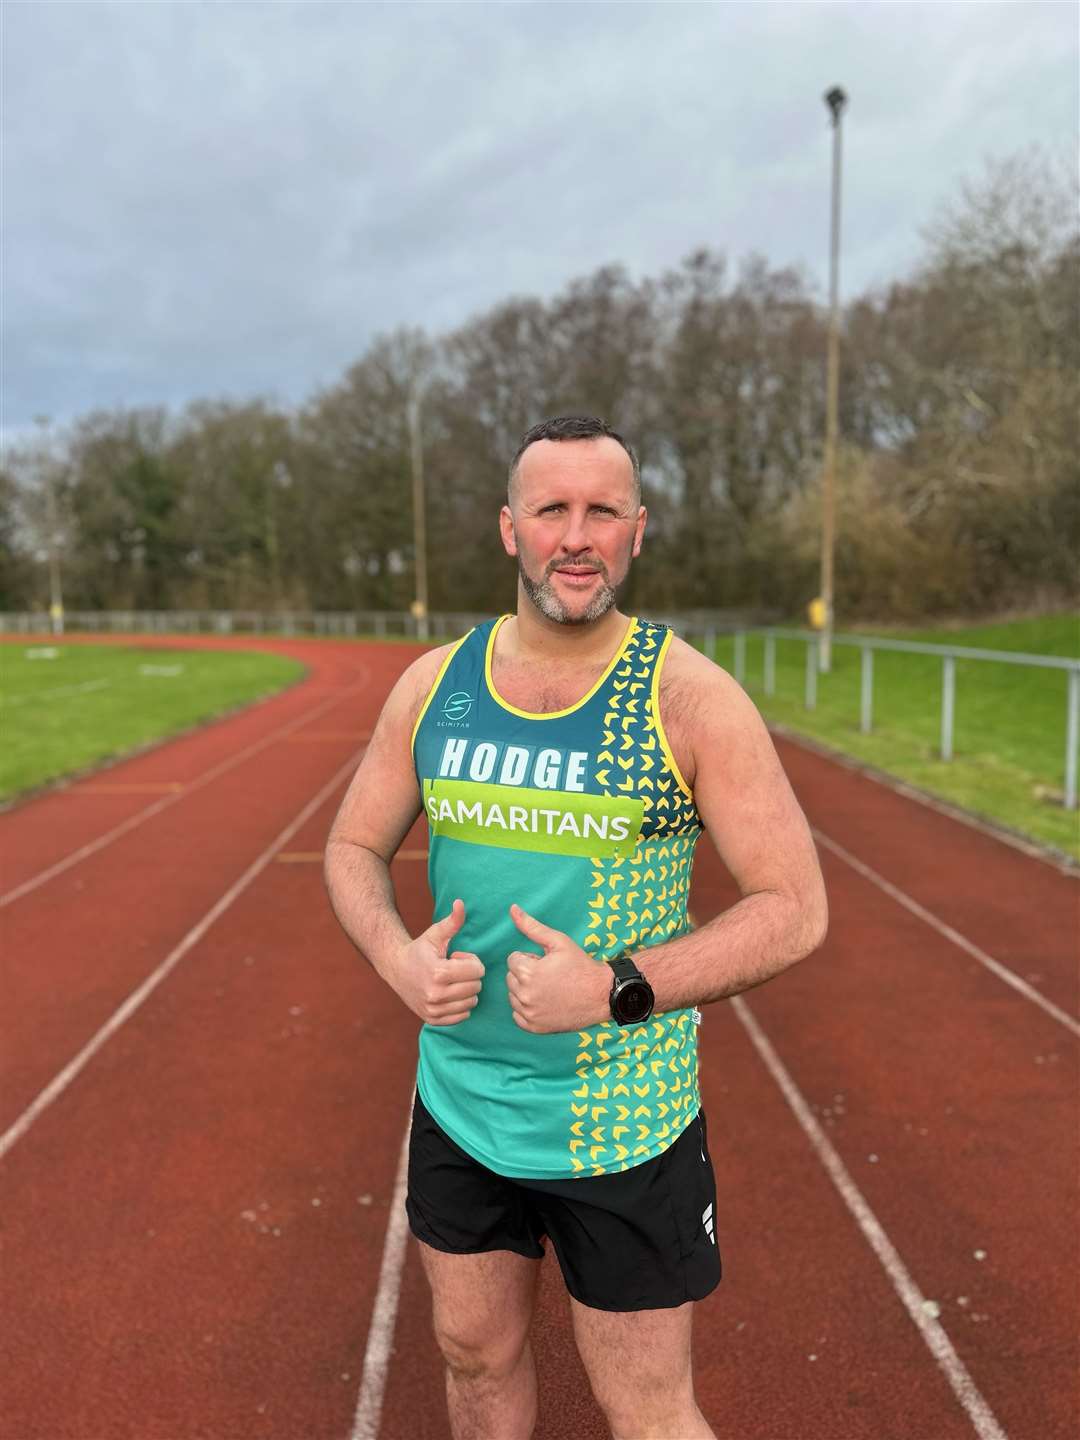 Dan Hodges is running the TCS London Marathon for Samaritans after speaking to the charity’s volunteers following his own suicide attempt (Dan Hodges/Samaritans/PA)